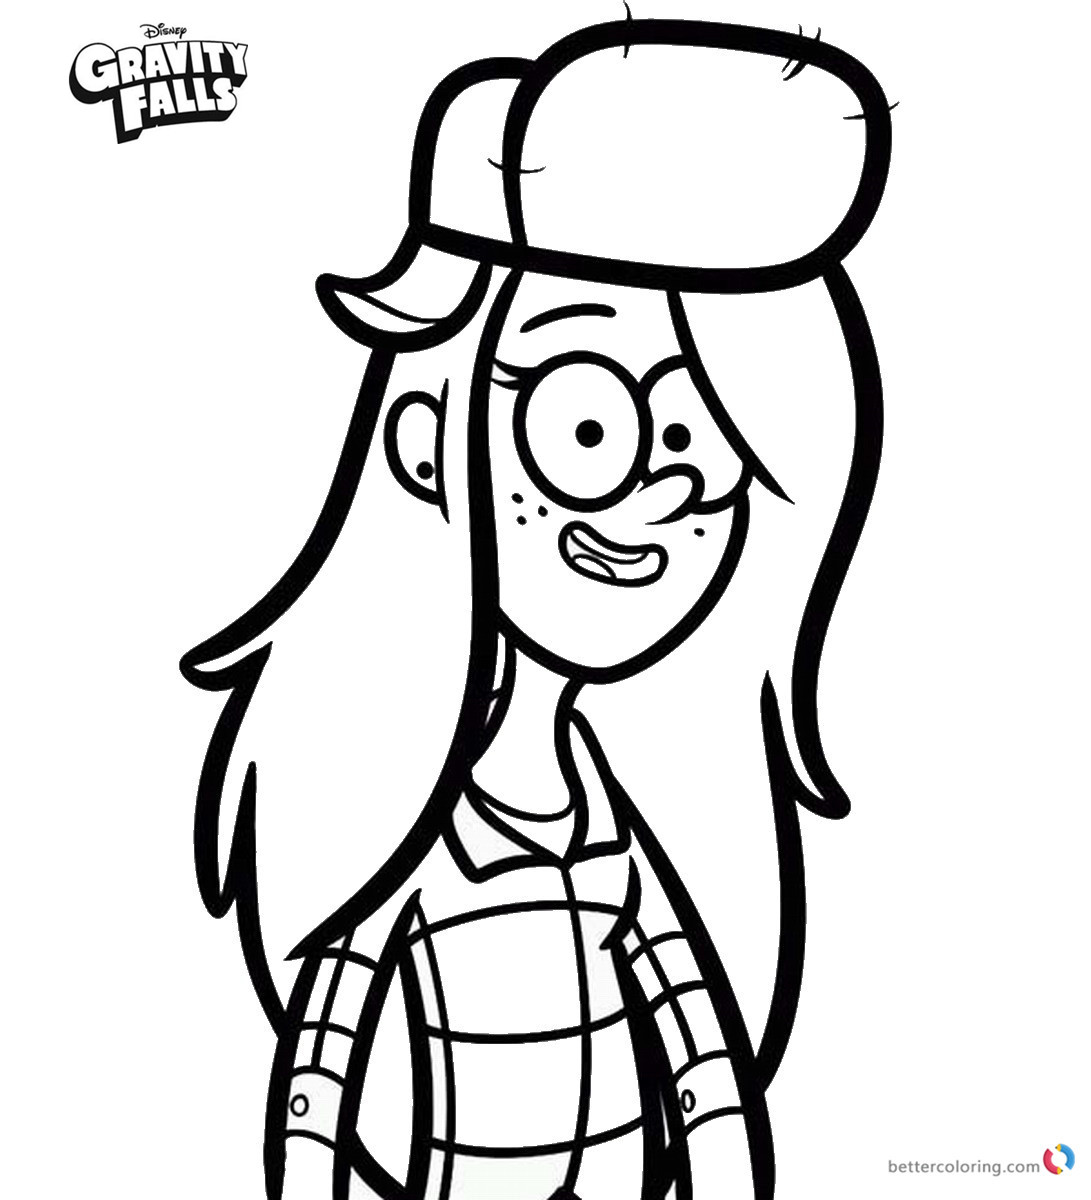 Gravity Falls coloring pages Wendy line art printable